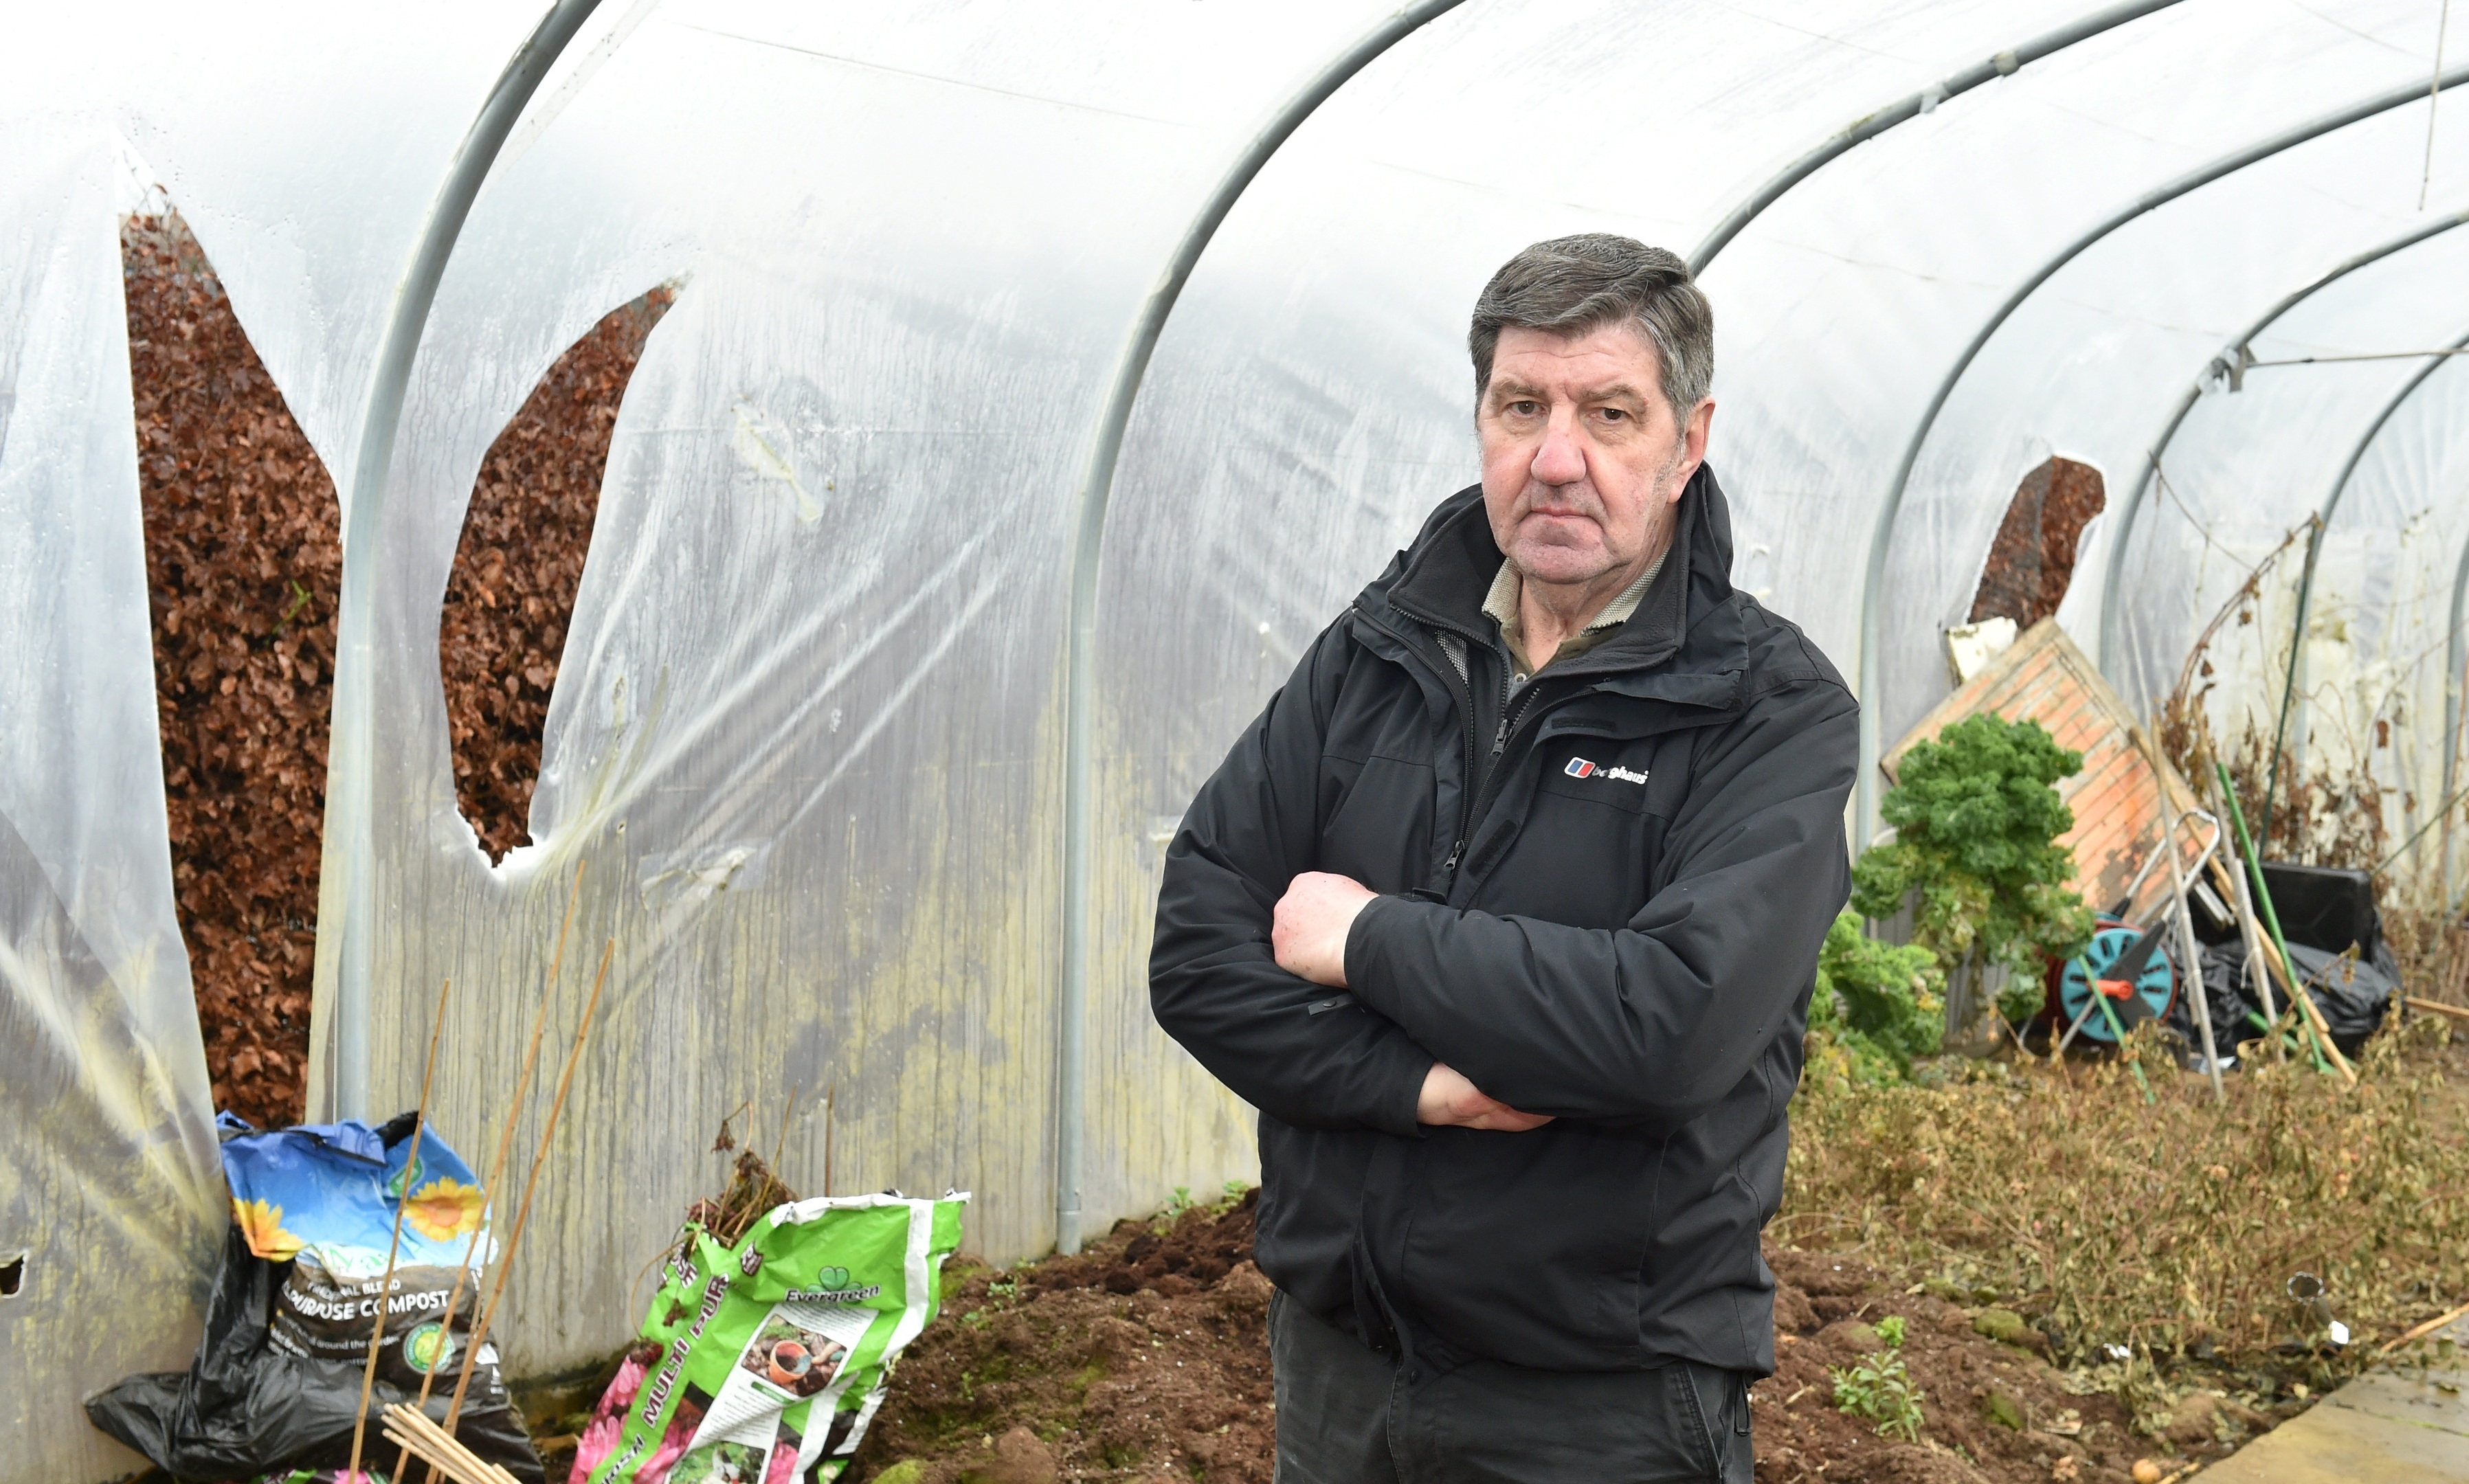 Inverurie Men's Shed was once again vandalised. Alistair Smith surveys the polytunnel which will cost around £1000 to replace.
(Picture by Colin Rennie)